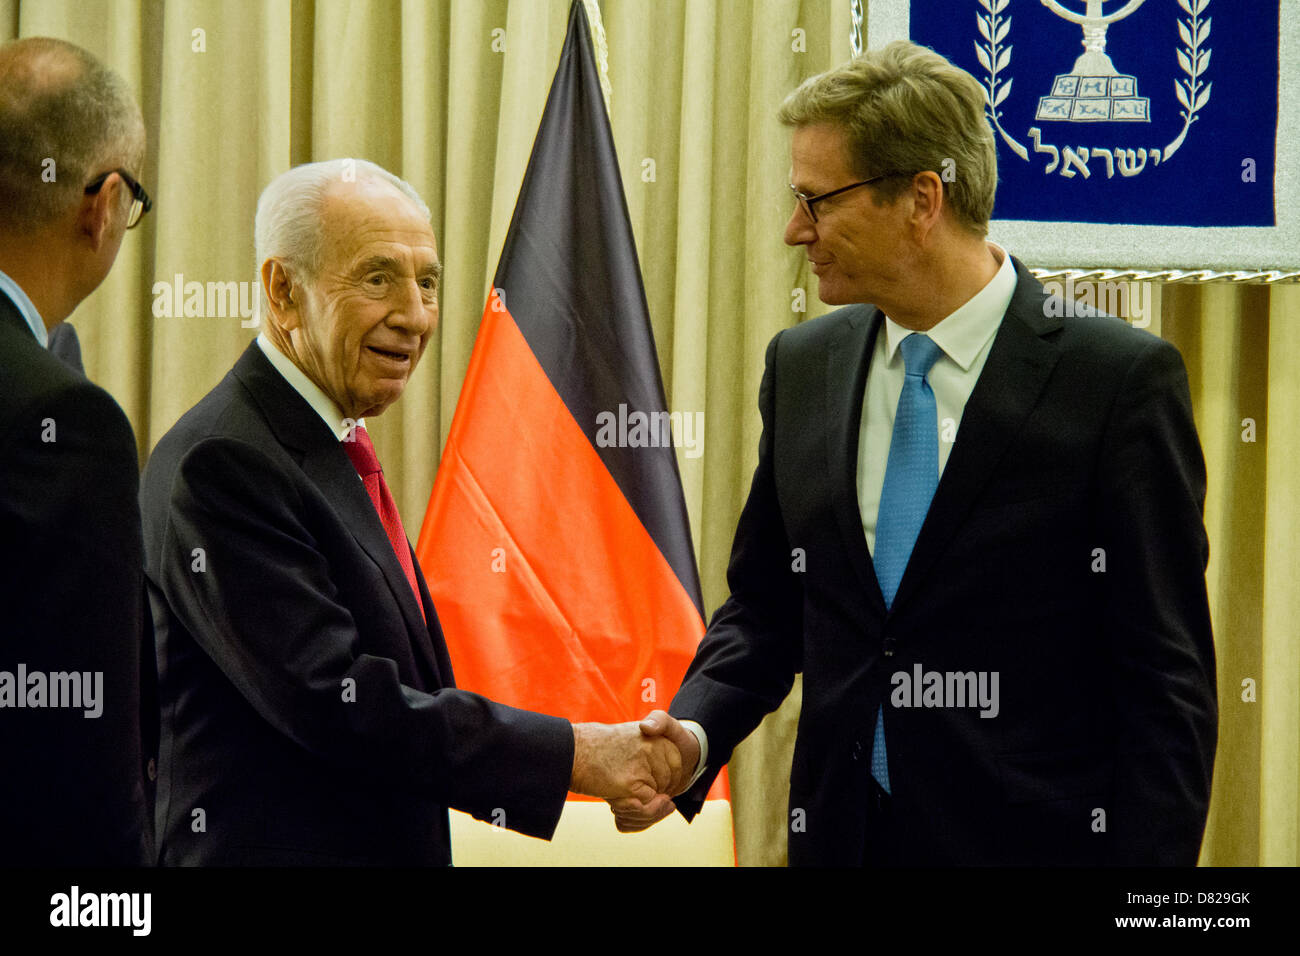 Jerusalem, Israel. 17th May 2013. Israeli President Shimon Peres (L) shakes hands with Minister of Foreign Affairs of the Federal Republic of Germany, Guido Westerwelle (R), at the onset of a diplomatic work meeting at the Presidents' Residence. Jerusalem, Israel. 17-May-2013.  Israeli President Shimon Peres hosts Minister of Foreign Affairs of the Federal Republic of Germany, Guido Westerwelle, for a diplomatic work meeting at the Presidents' Residence. Credit:  Nir Alon / Alamy Live News Stock Photo